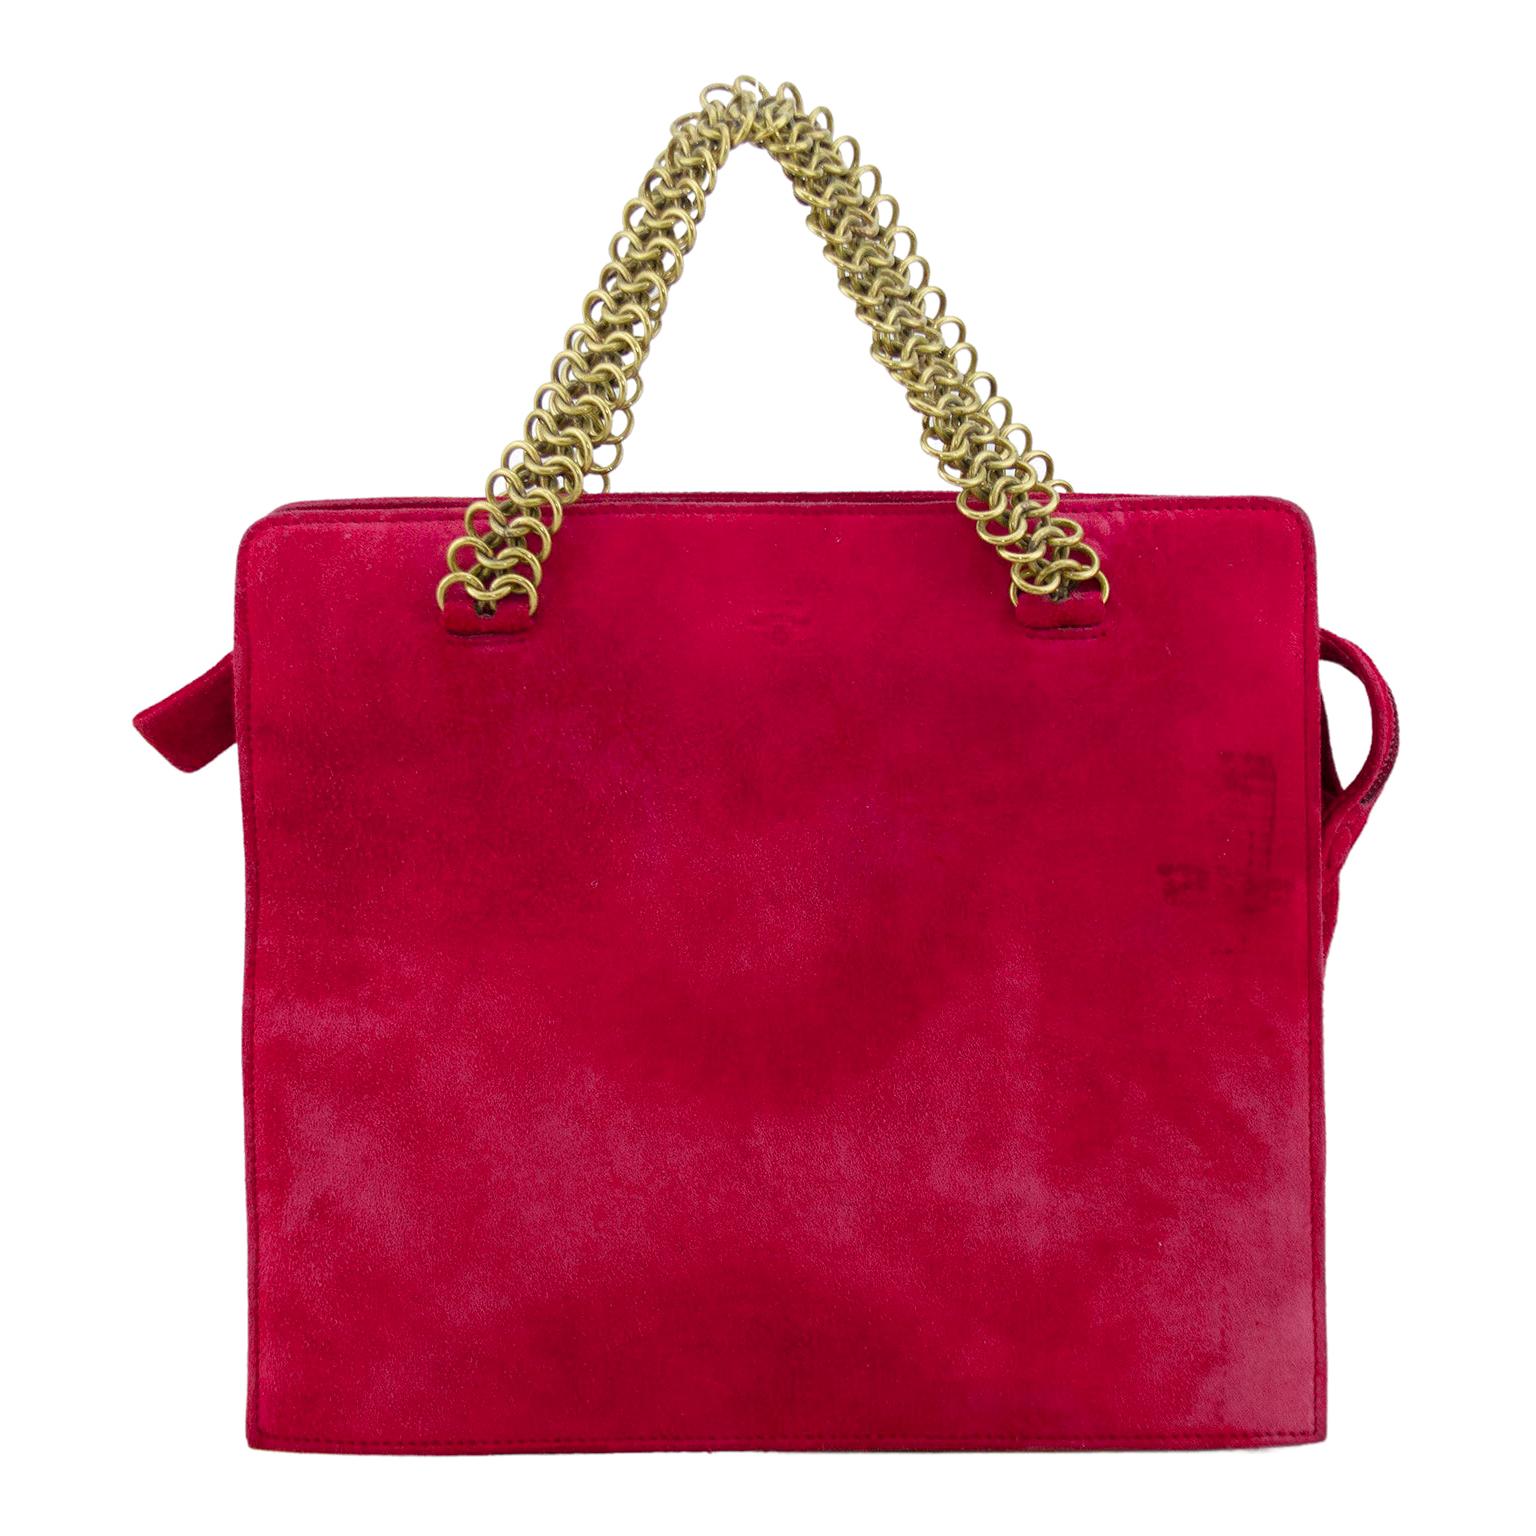 1990s Prada Red Suede Hand Bag with Gold Chain Handles 